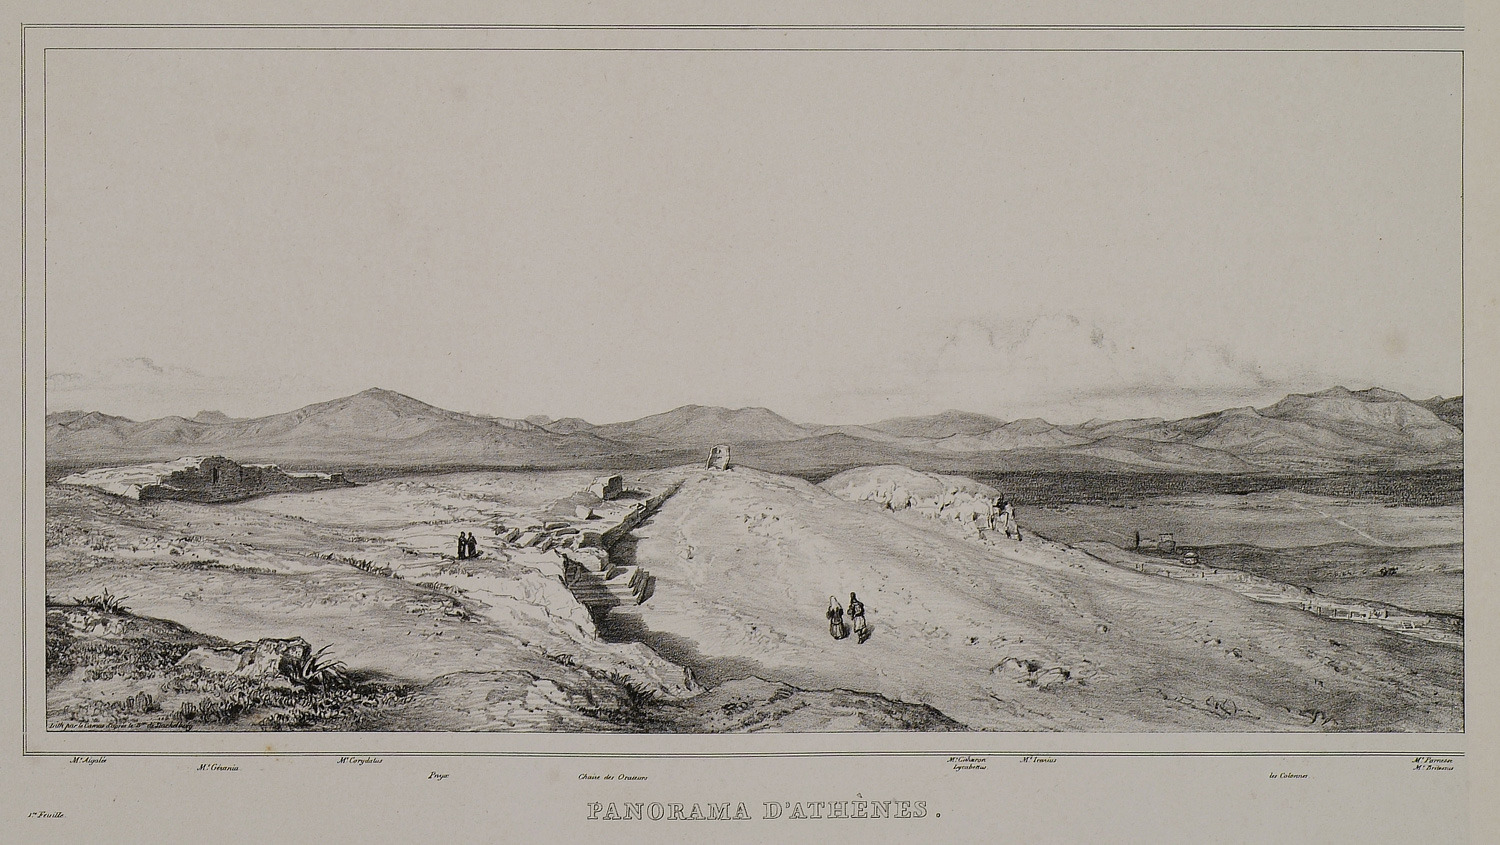 The bema of the Pnyx; on the centre right, the Hill of the Nymphs before the construction of the Observatory. To its left, a derelict round construction, possibly a wind mill (The Gennadius Library - American School of Classical Studies at Athens, from the website of the Aikaterini Laskaridi Foundation).